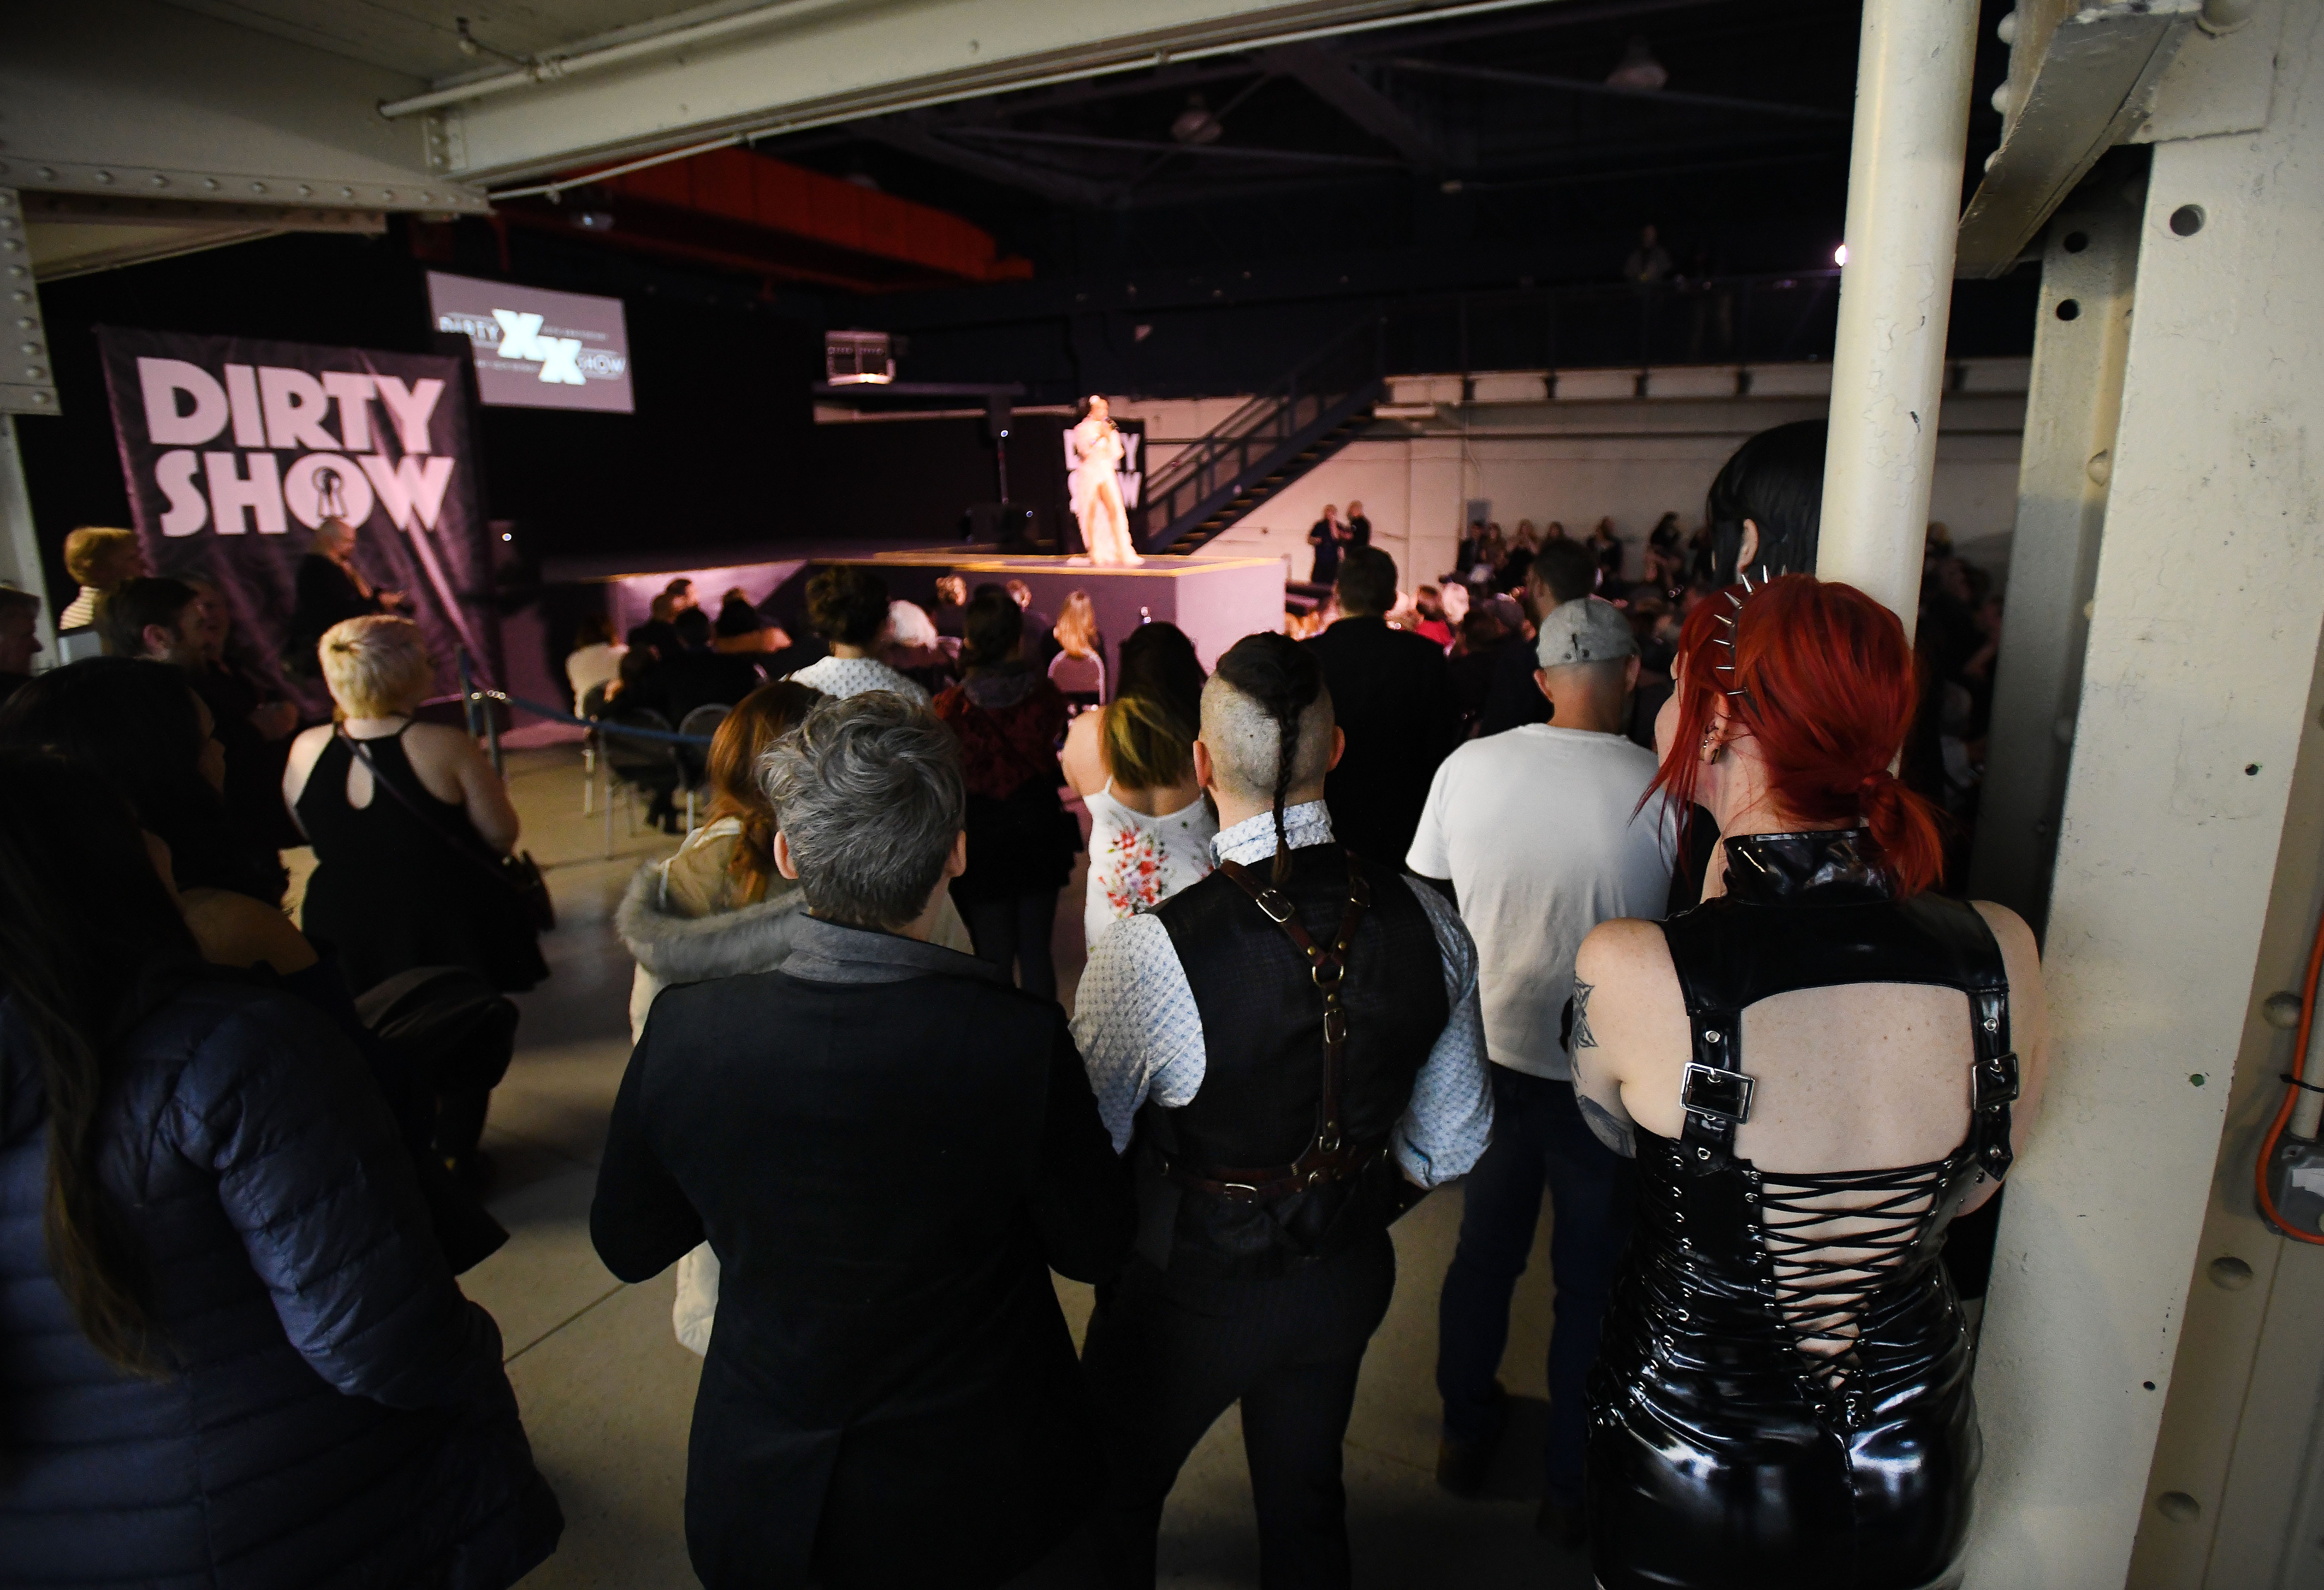 A crowd gathers for The 20th anniversary of the 'The Dirty Show', an erotic art and stage show at the Russell Industrial Complex in Detroit, Michigan on February 8, 2019.